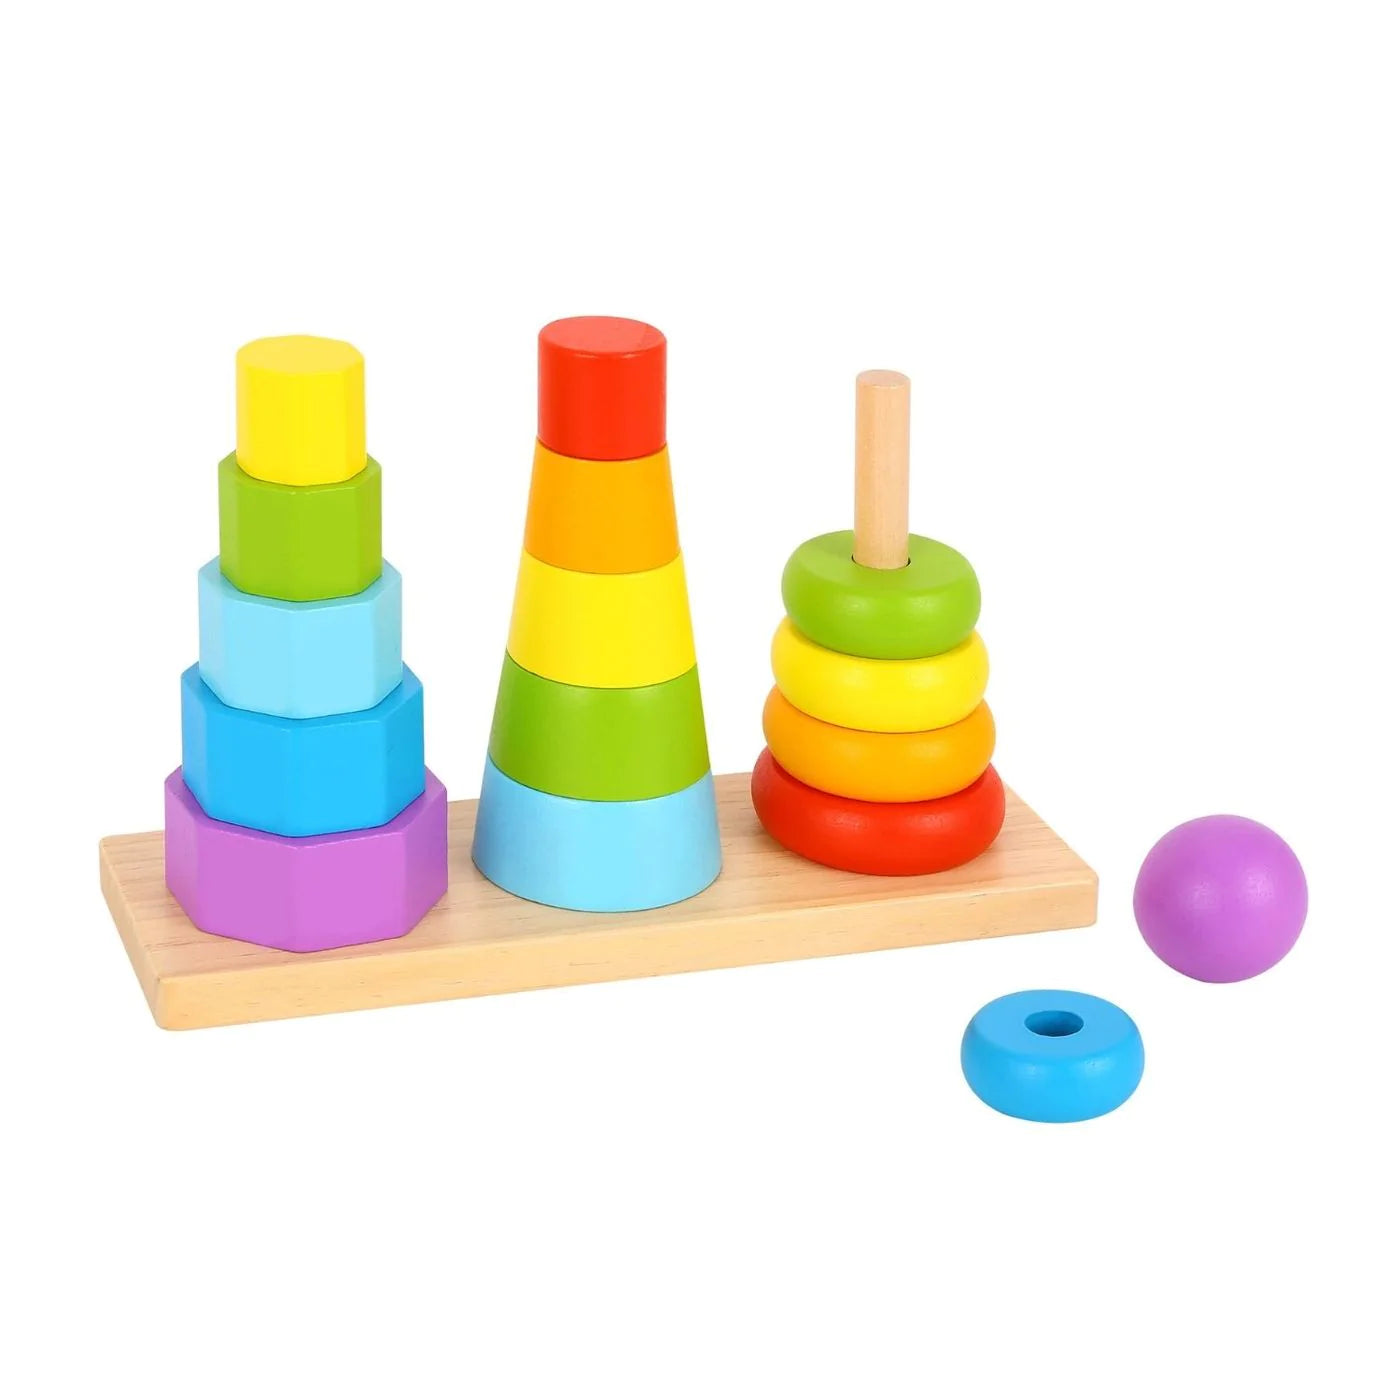 Tooky Toy 3 Shape Tower